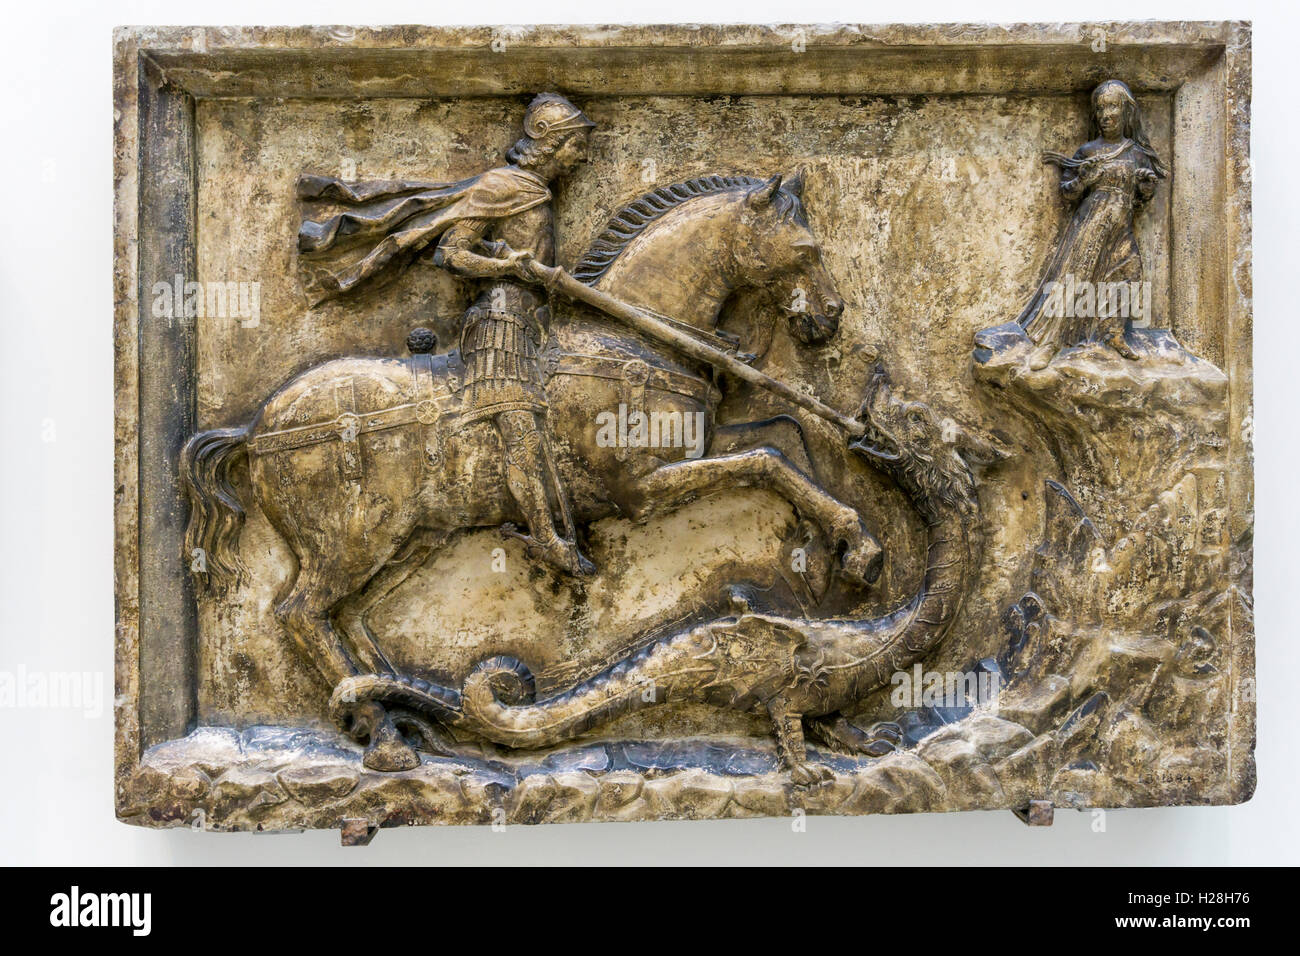 16th century stone relief of St George fighting dragon.  Originally from a house in Venice, now in the Victoria & Albert Museum. Stock Photo